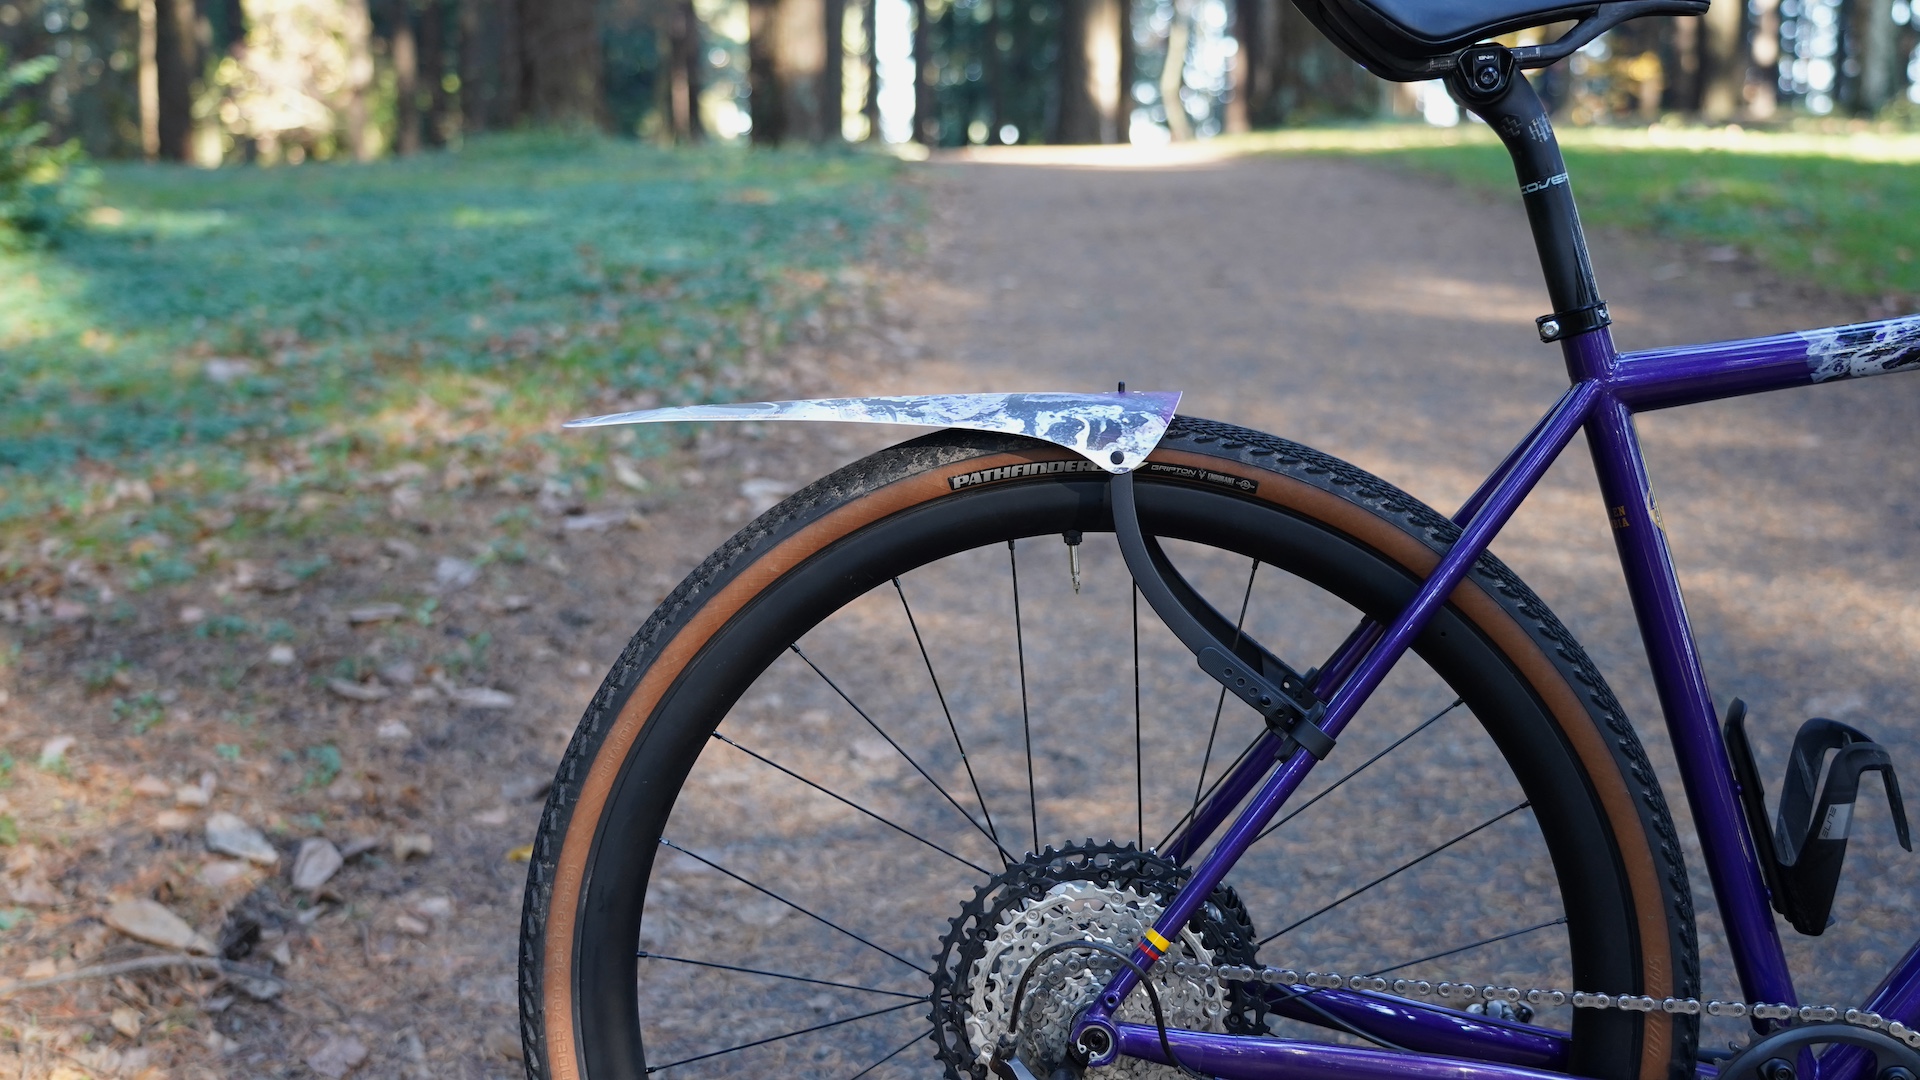 The best $27 bike accessory you can buy: a review of Ass Savers